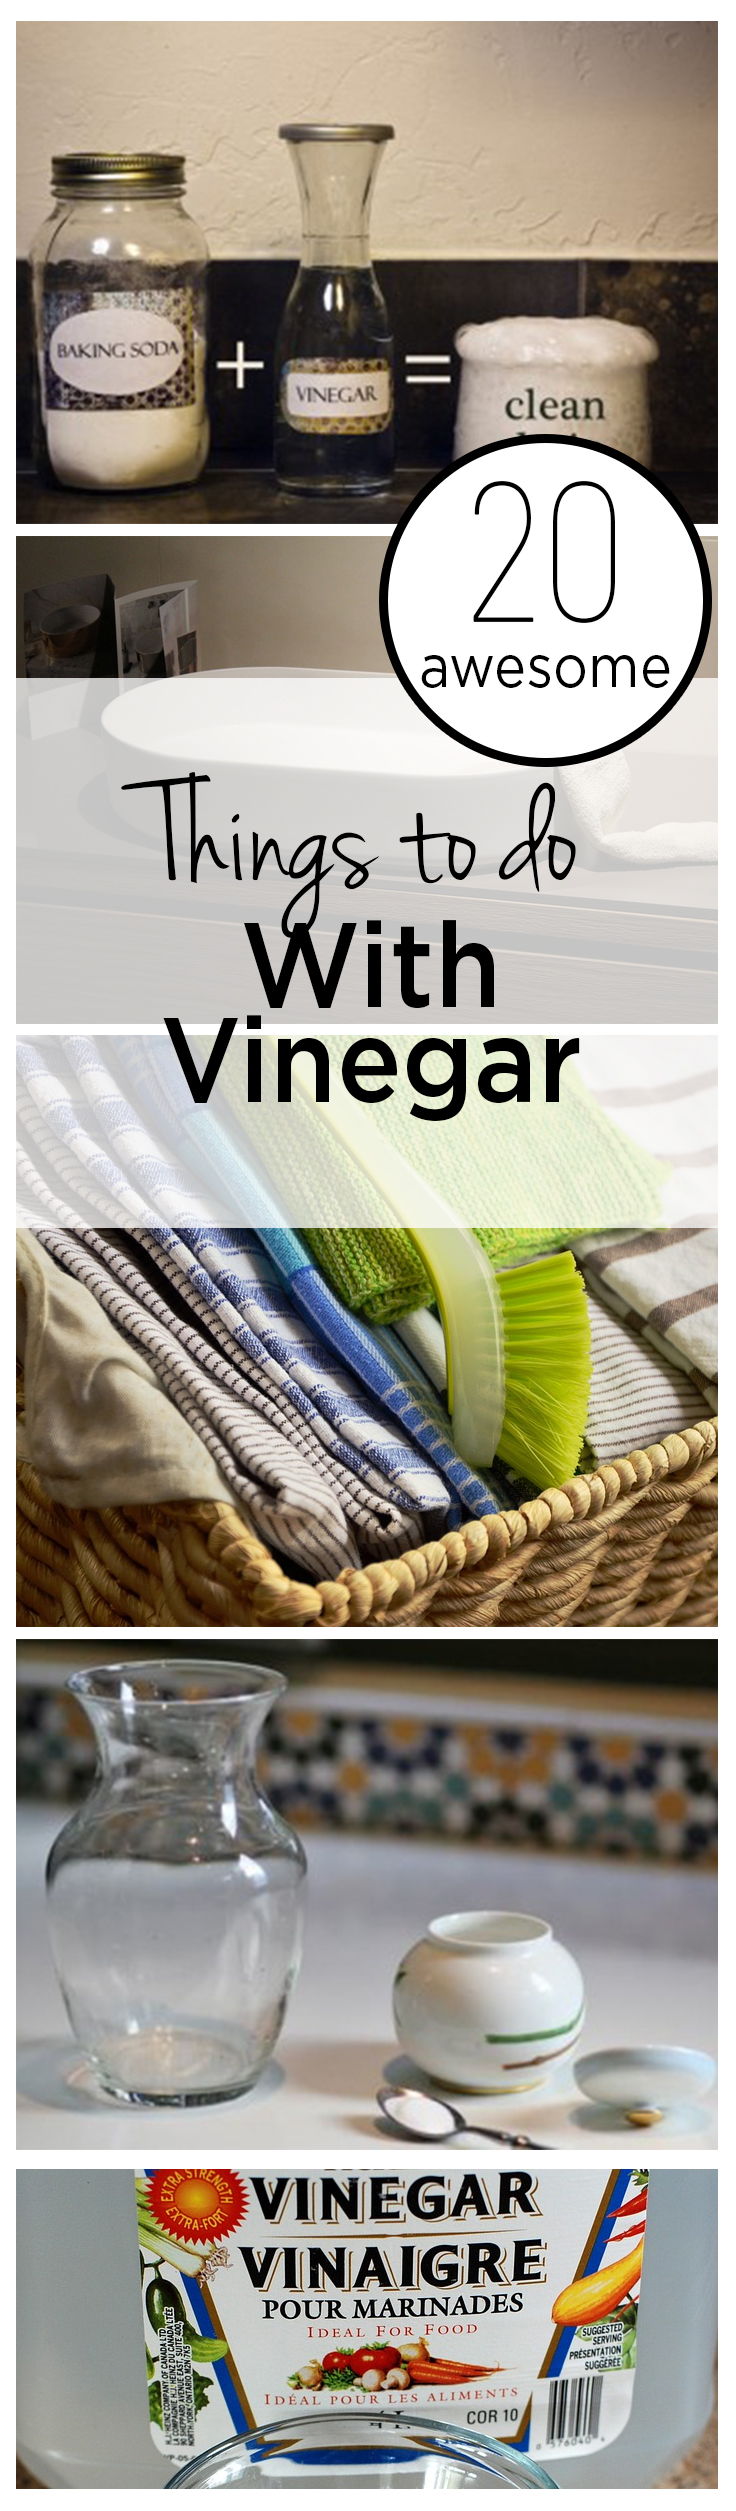 Vinegar, things to do with vinegar, life hacks, cleaning hacks, popular pin, home organization, clean home